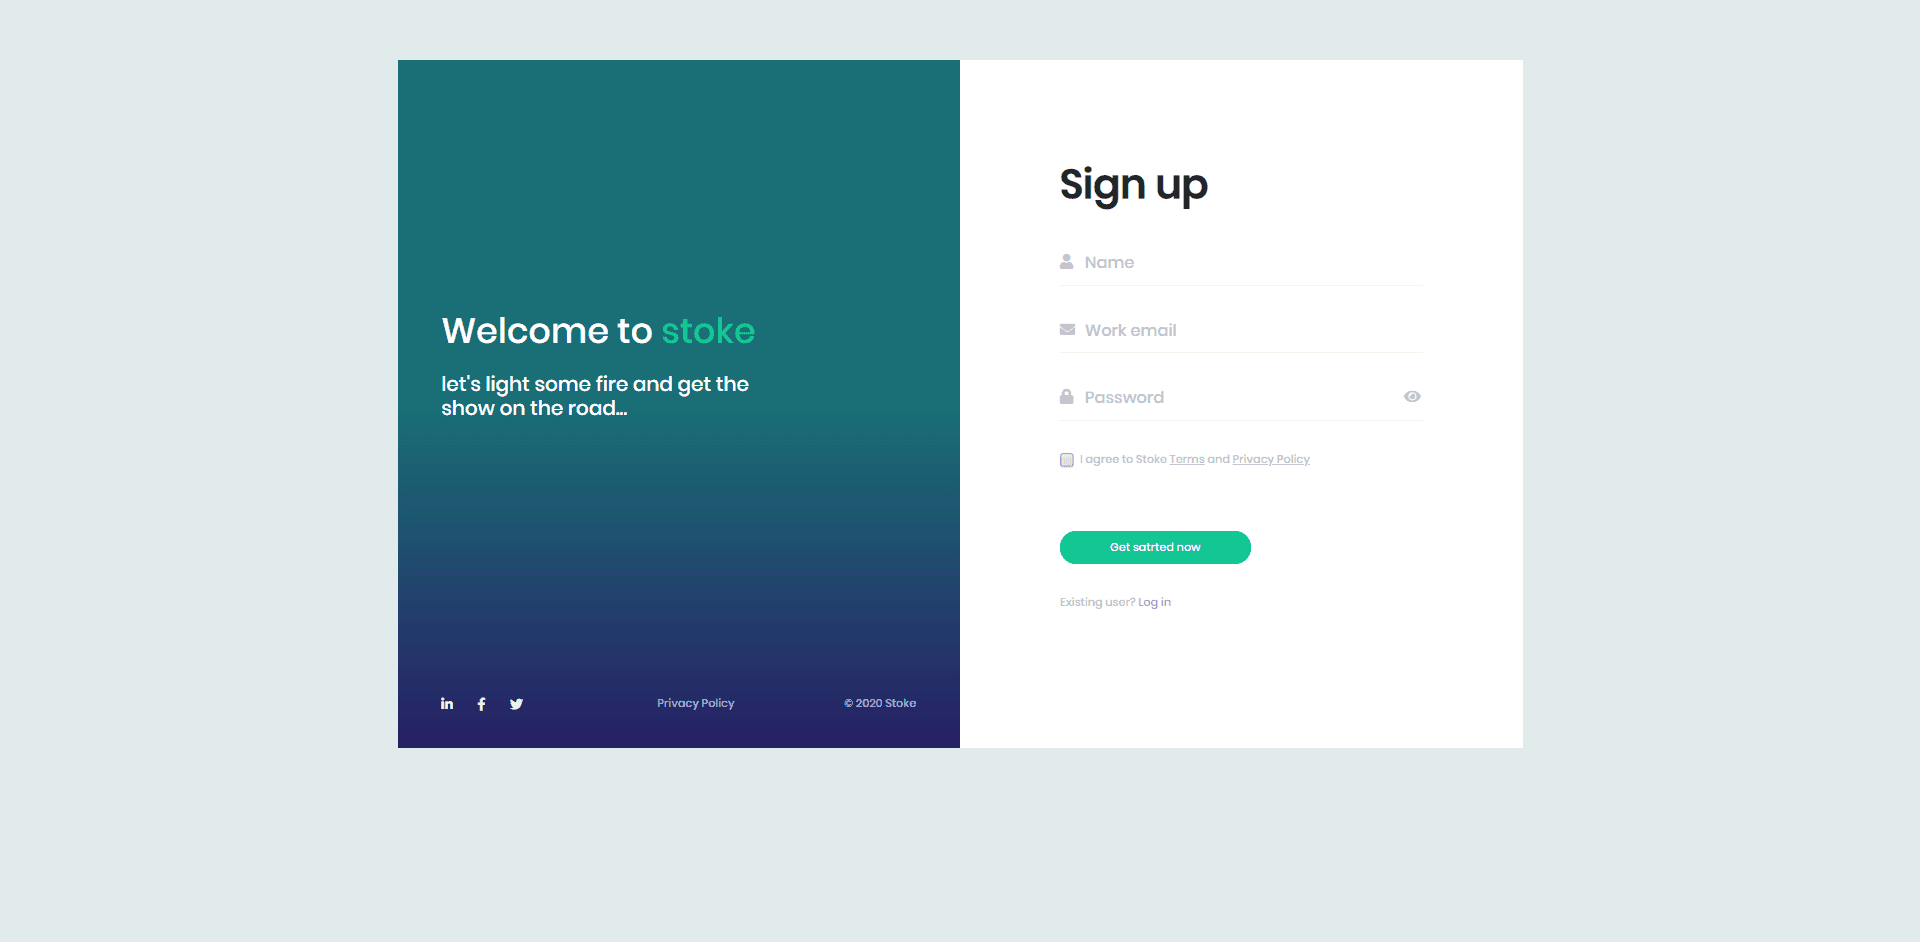 Sign up form with social media icons in footer